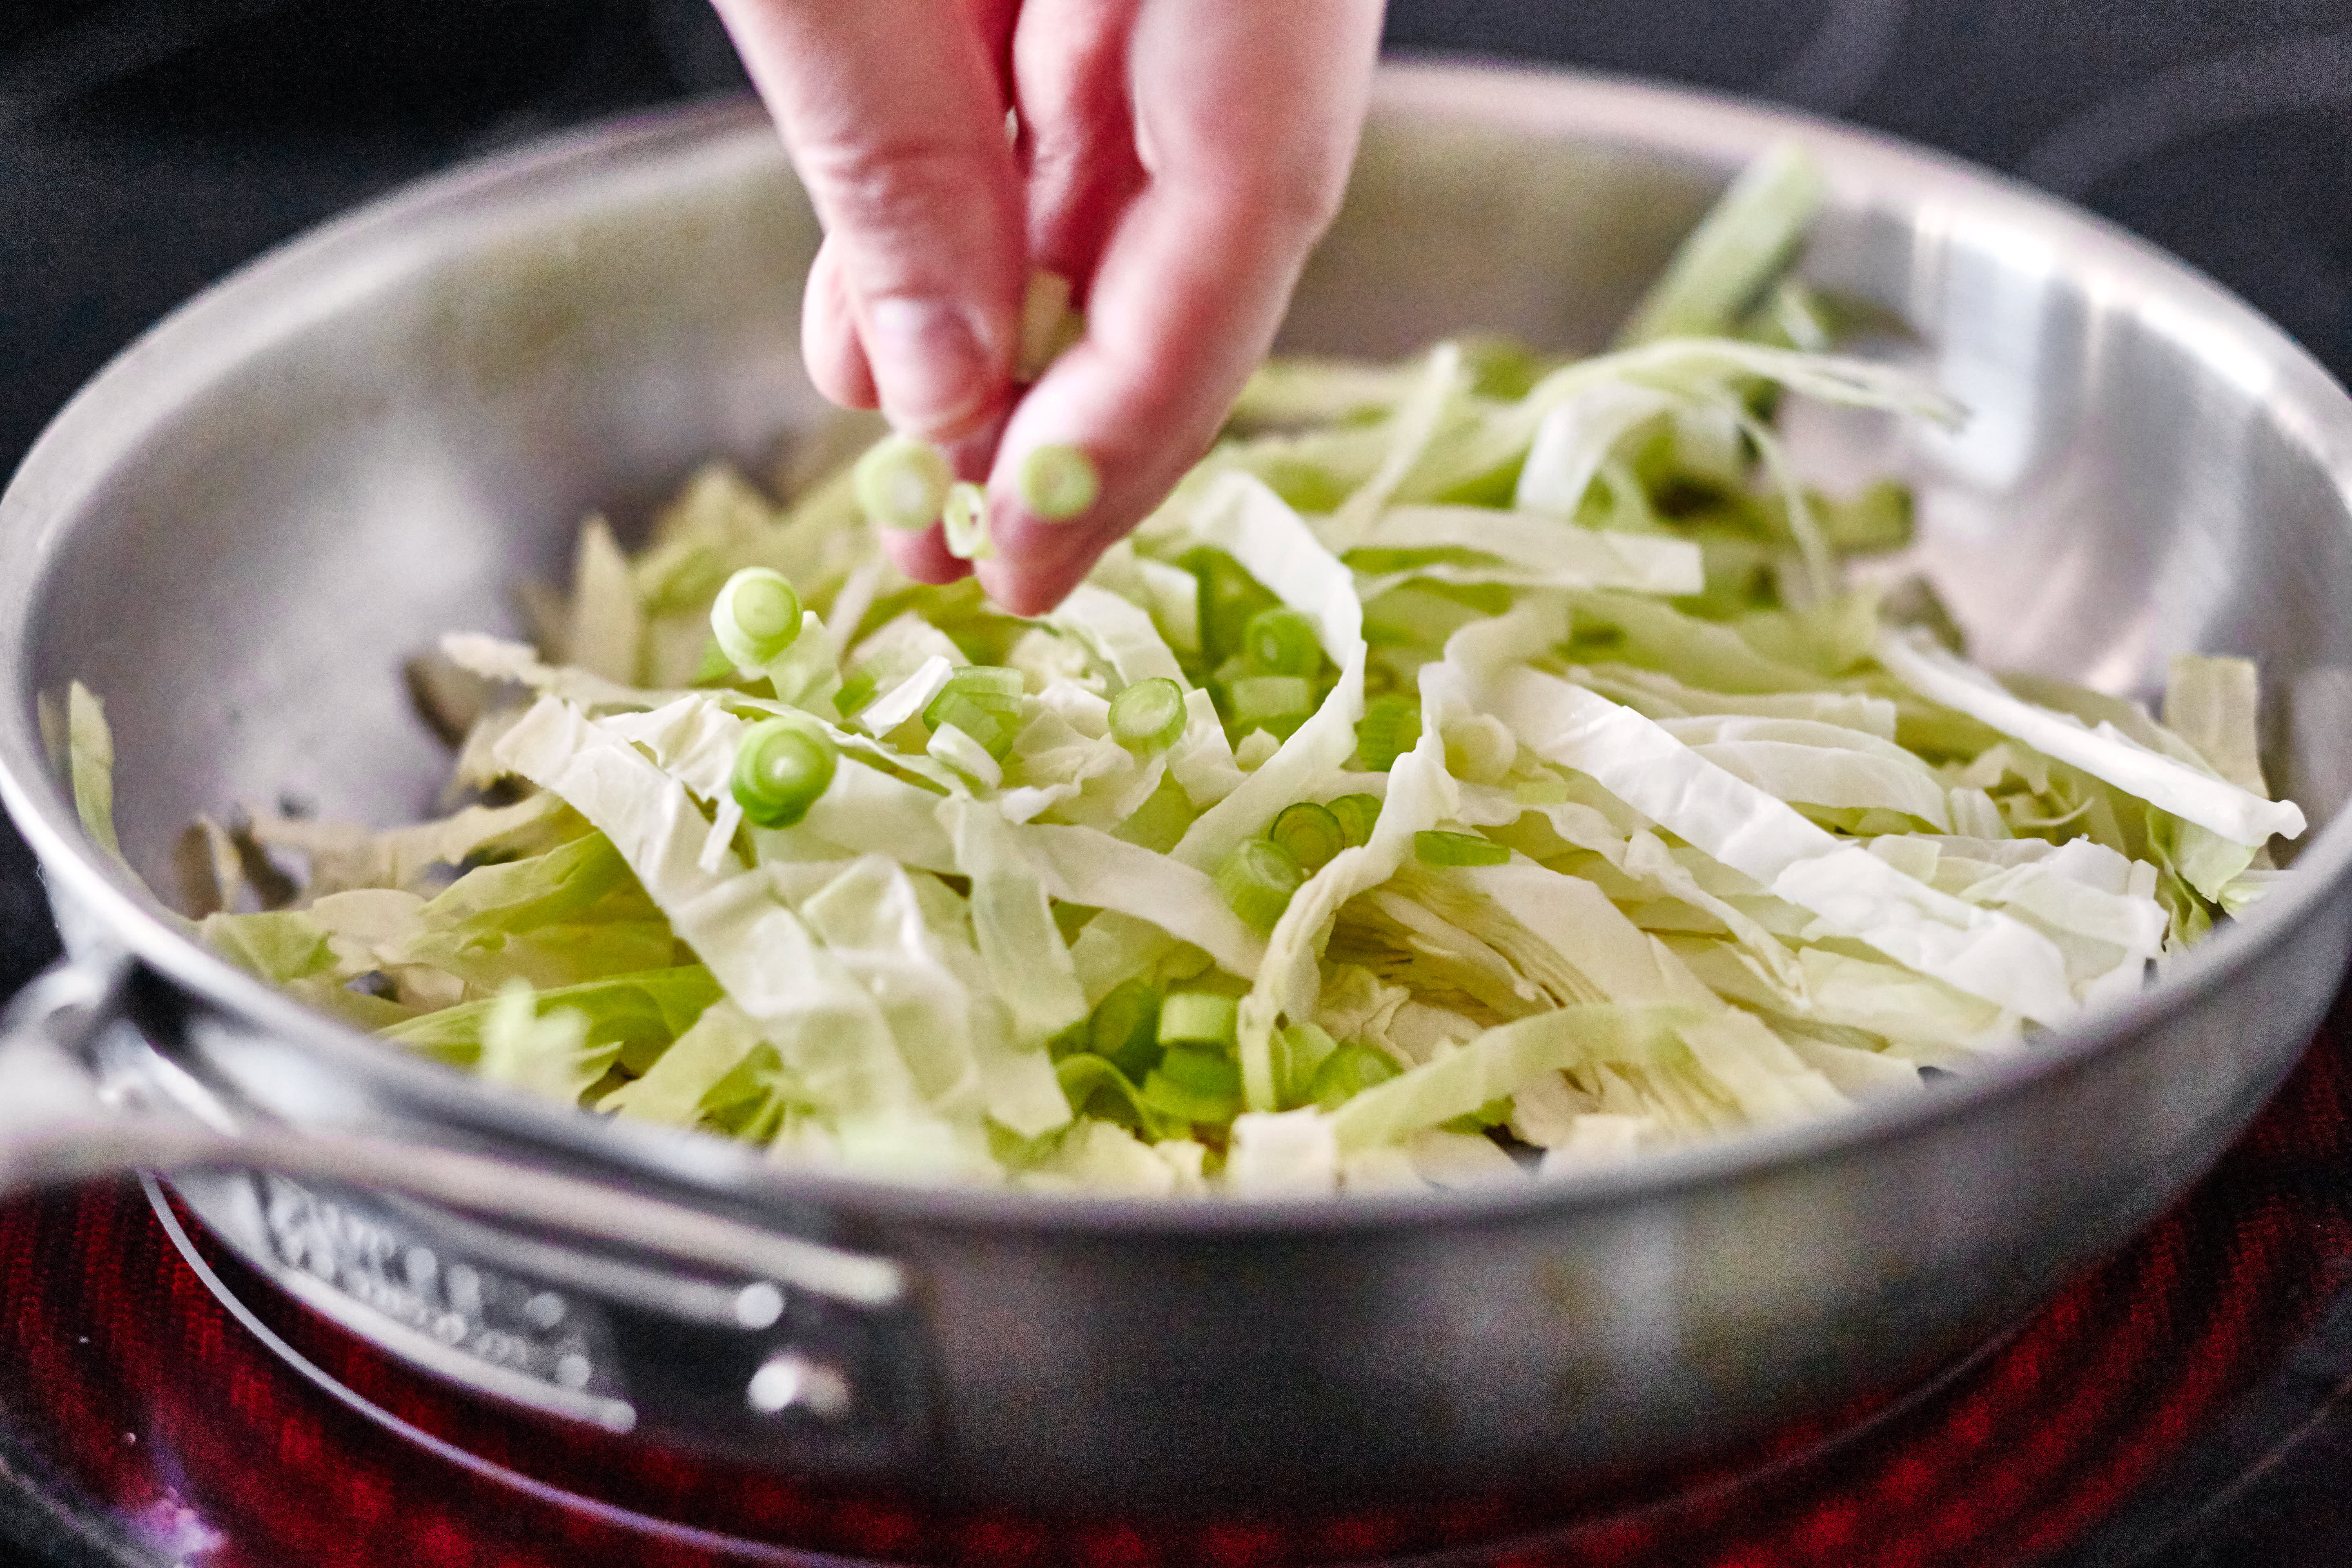 Sautéed Cabbage - A Quick and Simple Irish Side Dish